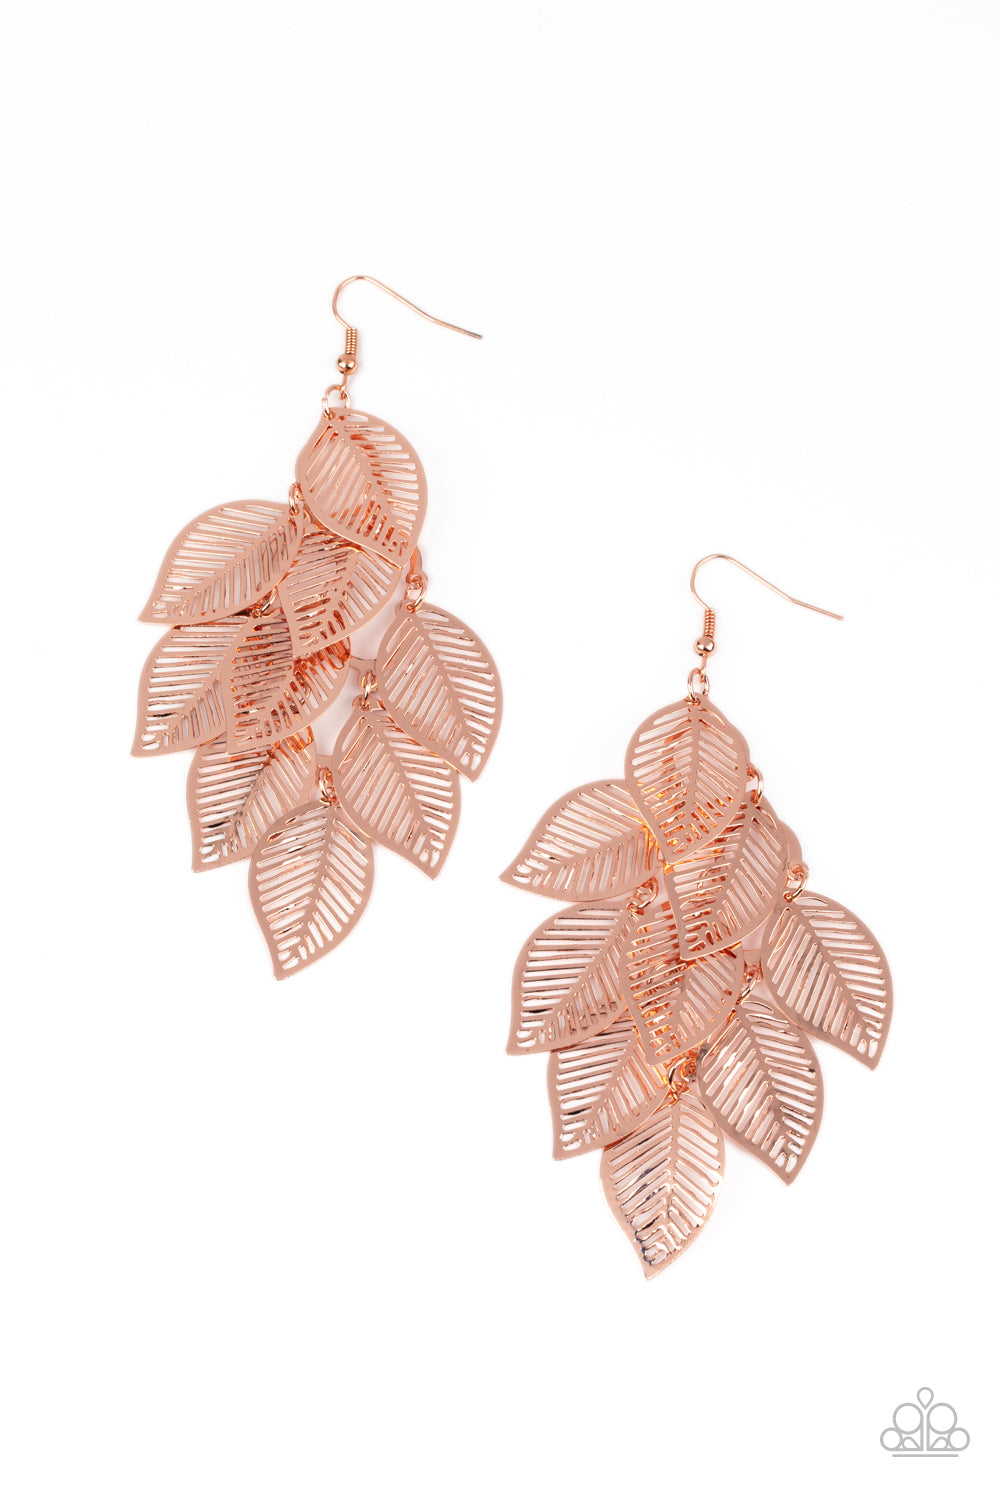 Limitlessly Leafy - Copper Earrings - Princess Glam Shop